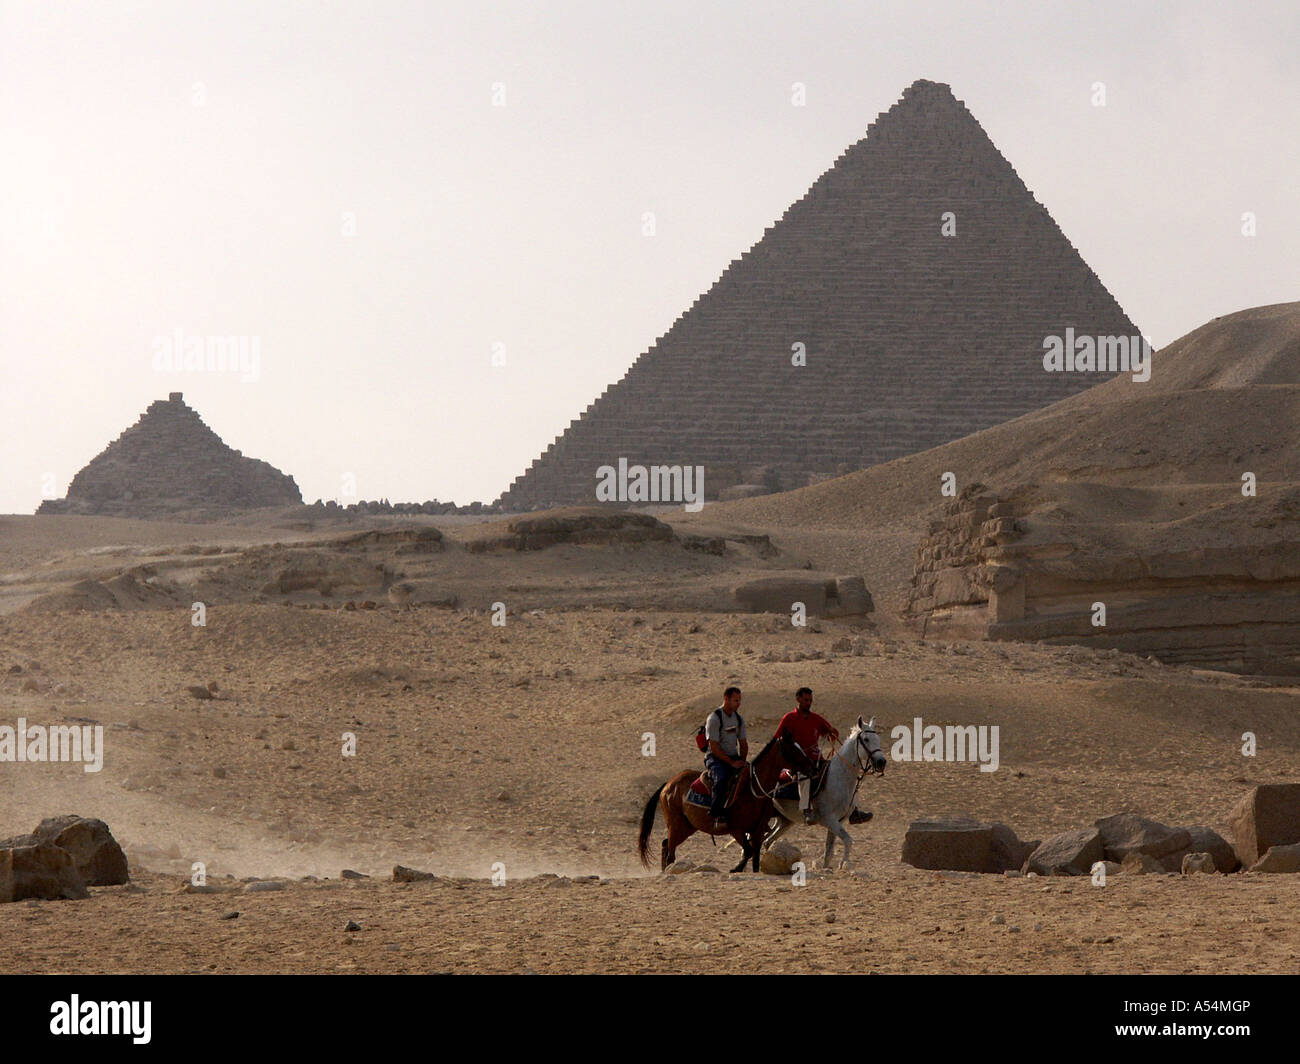 Painet ip1667 egypt pyramids giza 2002 country developing nation less economically developed culture emerging market Stock Photo